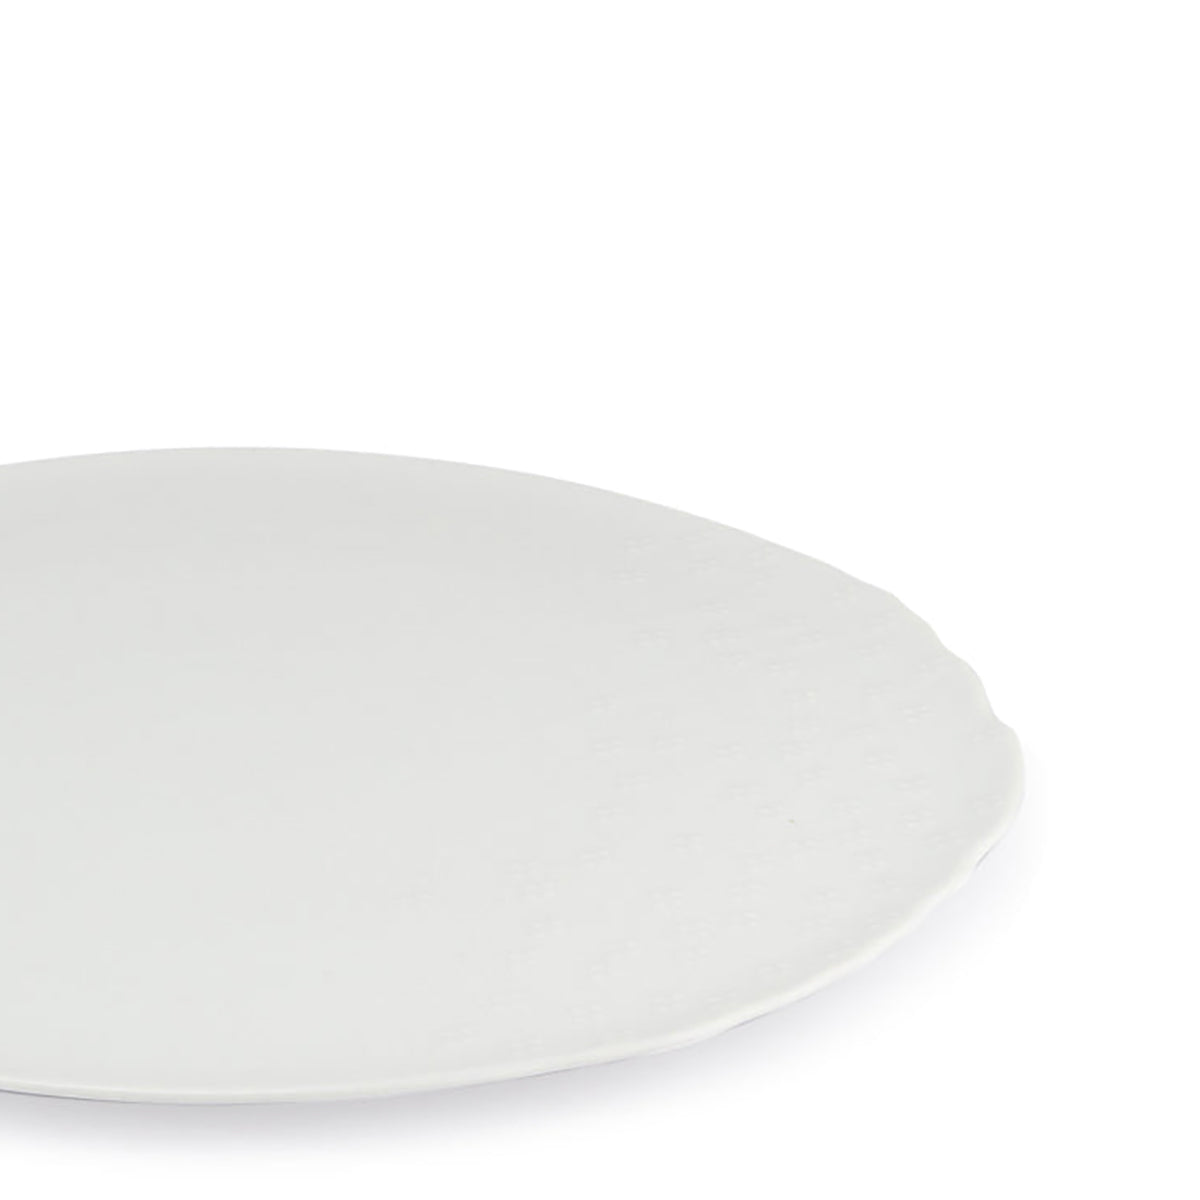 Rosenthal Weiss Service Plate White